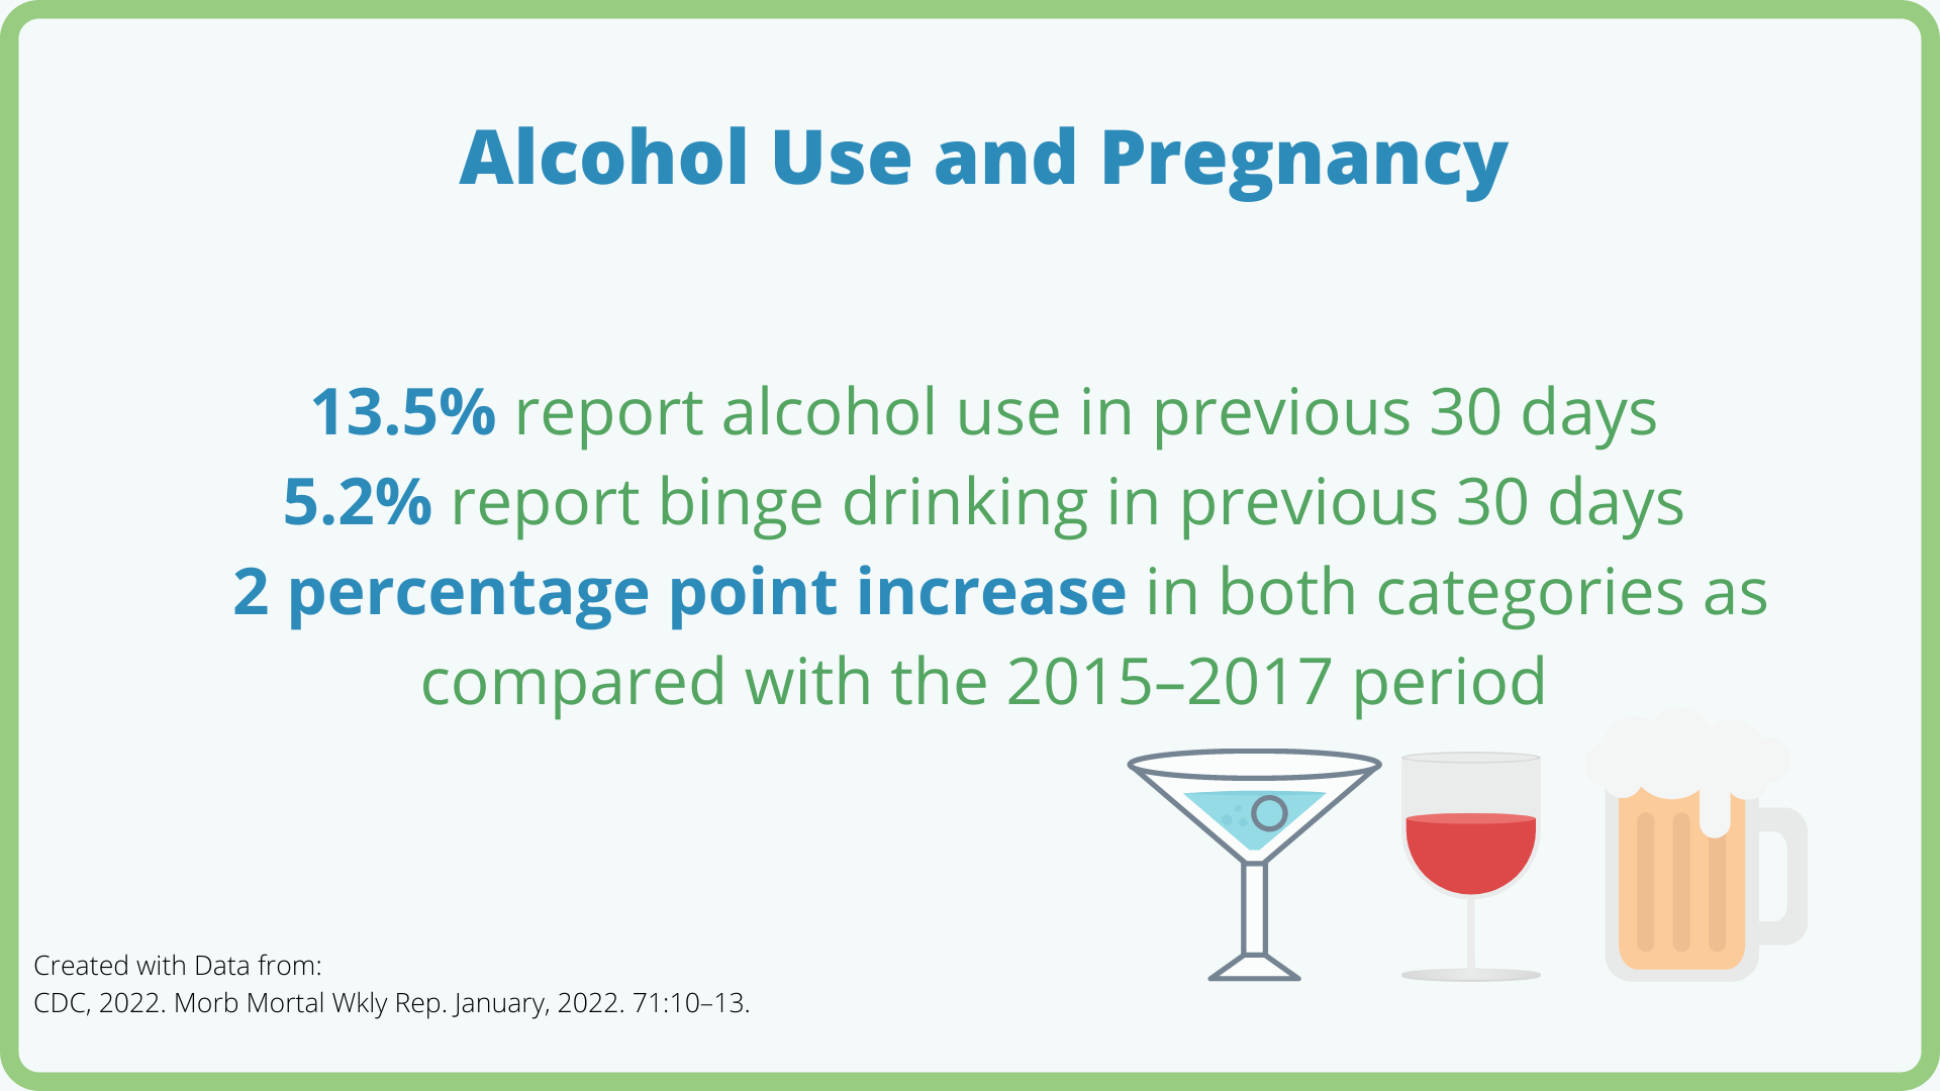 Alcohol use and pregnancy: 13.5% report alcohol use in previous 30 days; 5.2% report binge drinking in previous 30 days; 2 percentage point increase in both categories as compared with the 2015-2017 period